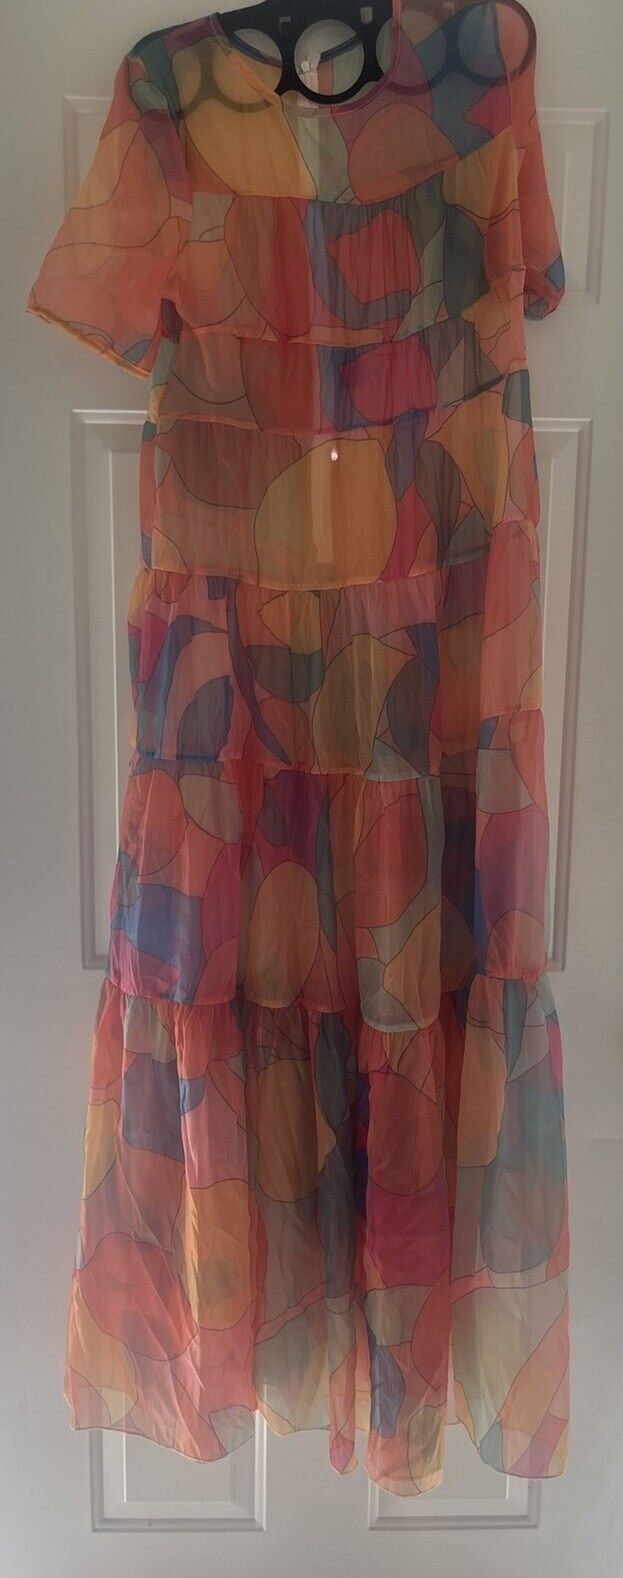 VTG 60s Sheer Psychedelic Print Maxi Dress Sz S 1960s Gown Hostess Party Ruffled